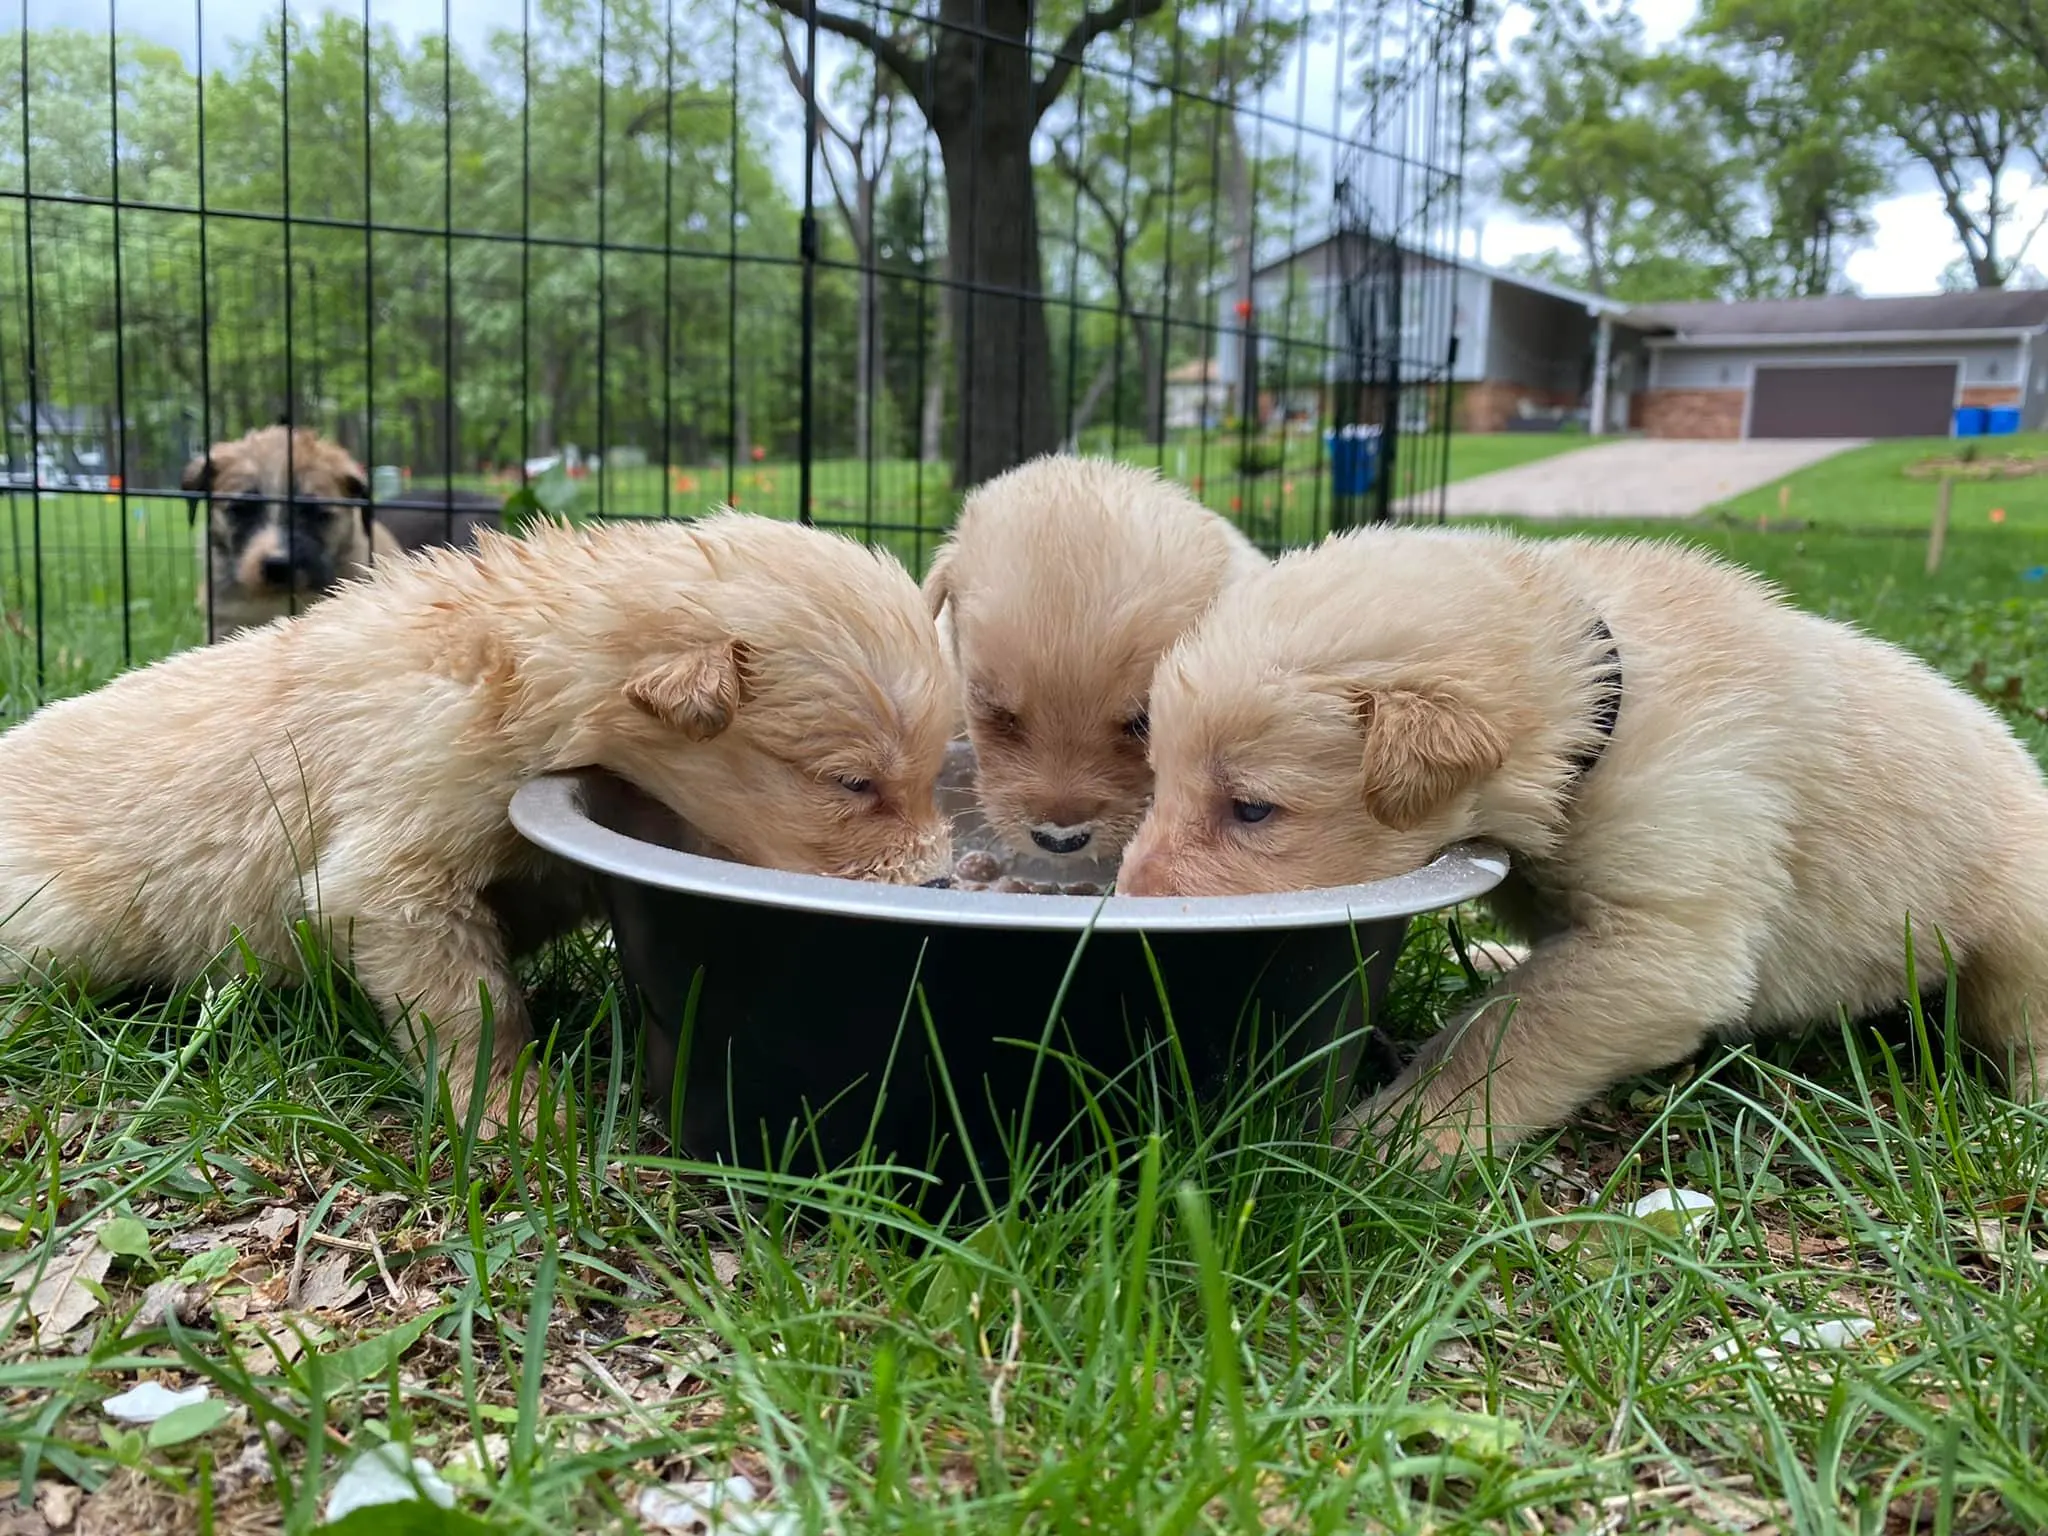 three puppies eating from a bowl